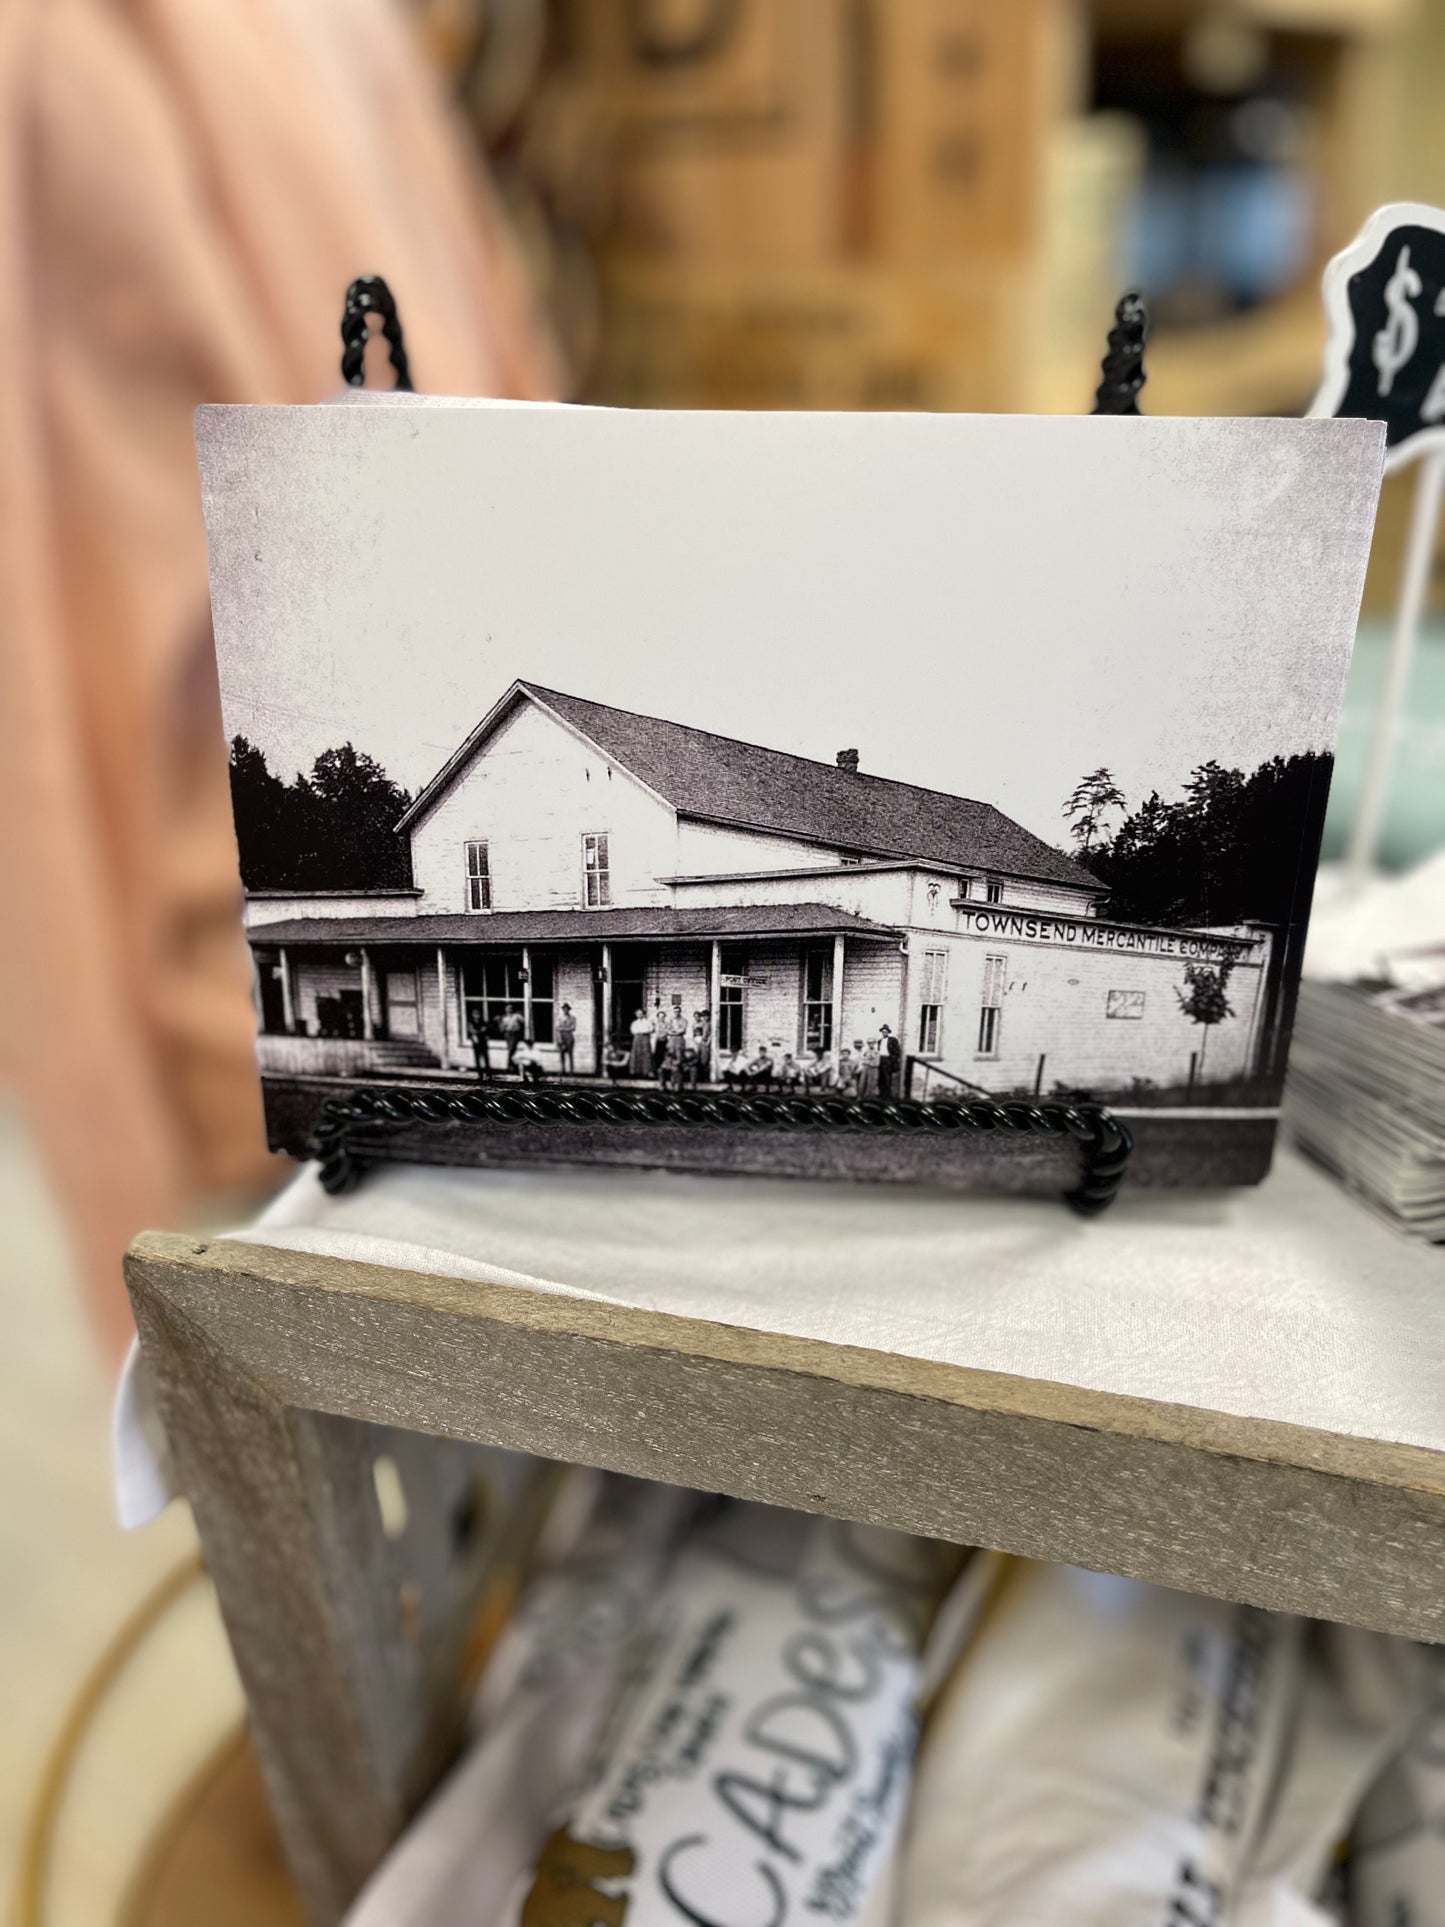 Load image into Gallery viewer, Original Townsend Mercantile Company Merchandise
